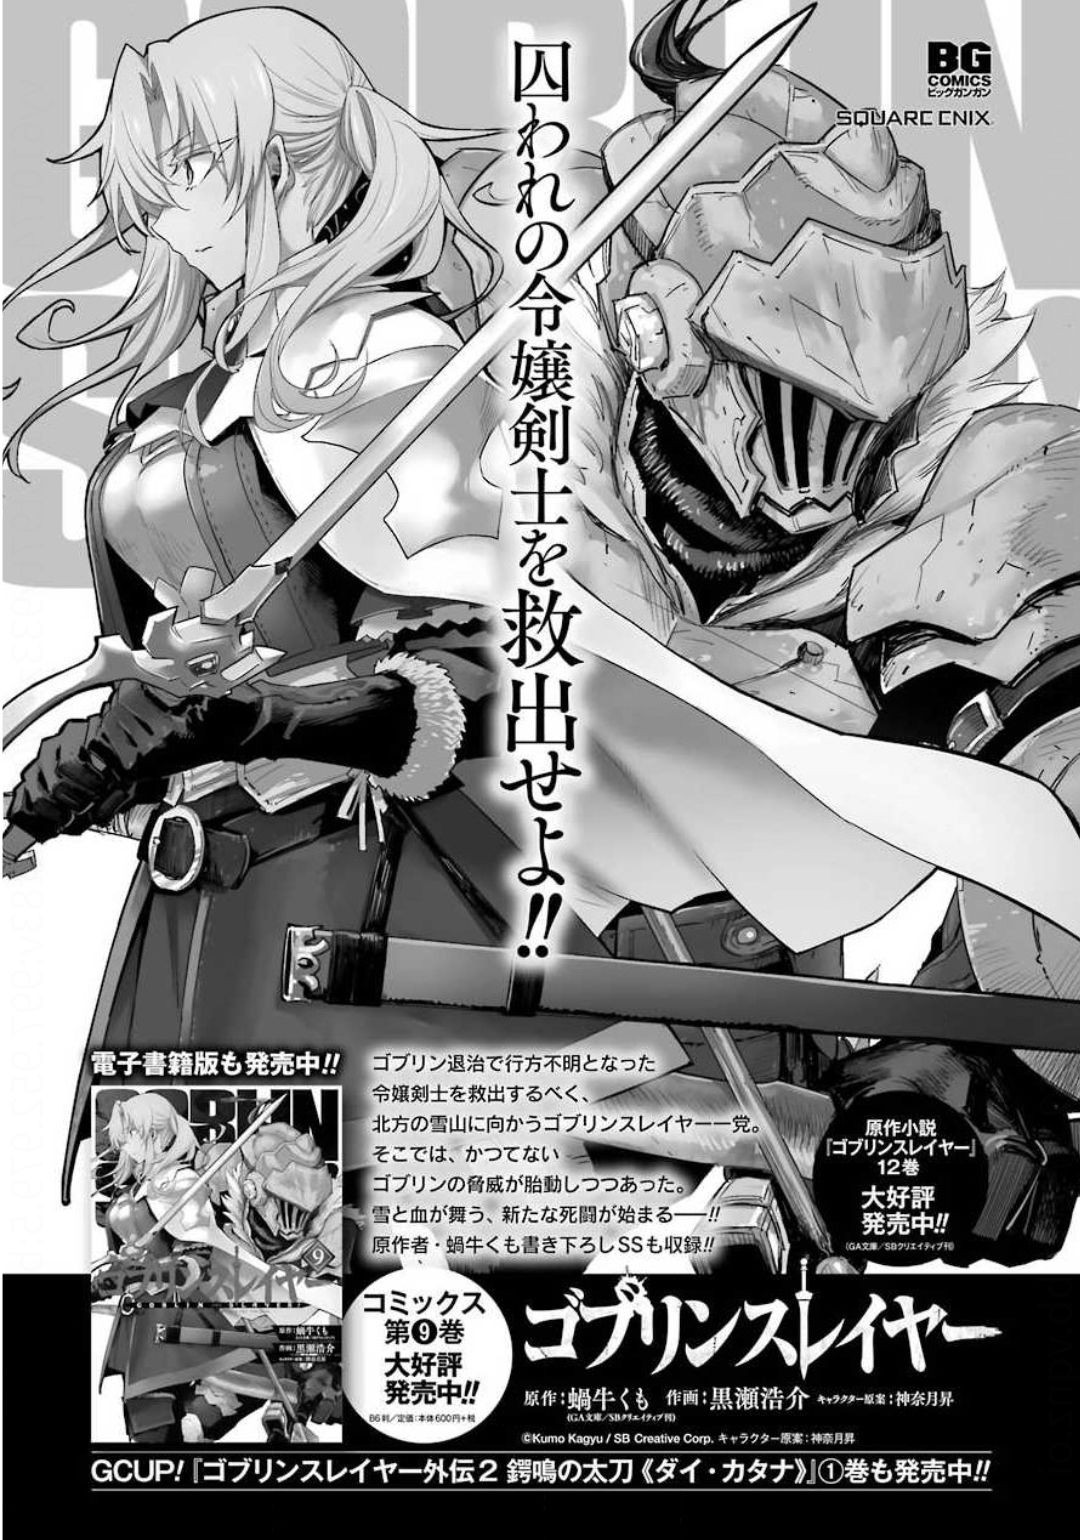 Goblin Slayer - Chapter 48 - Page 1